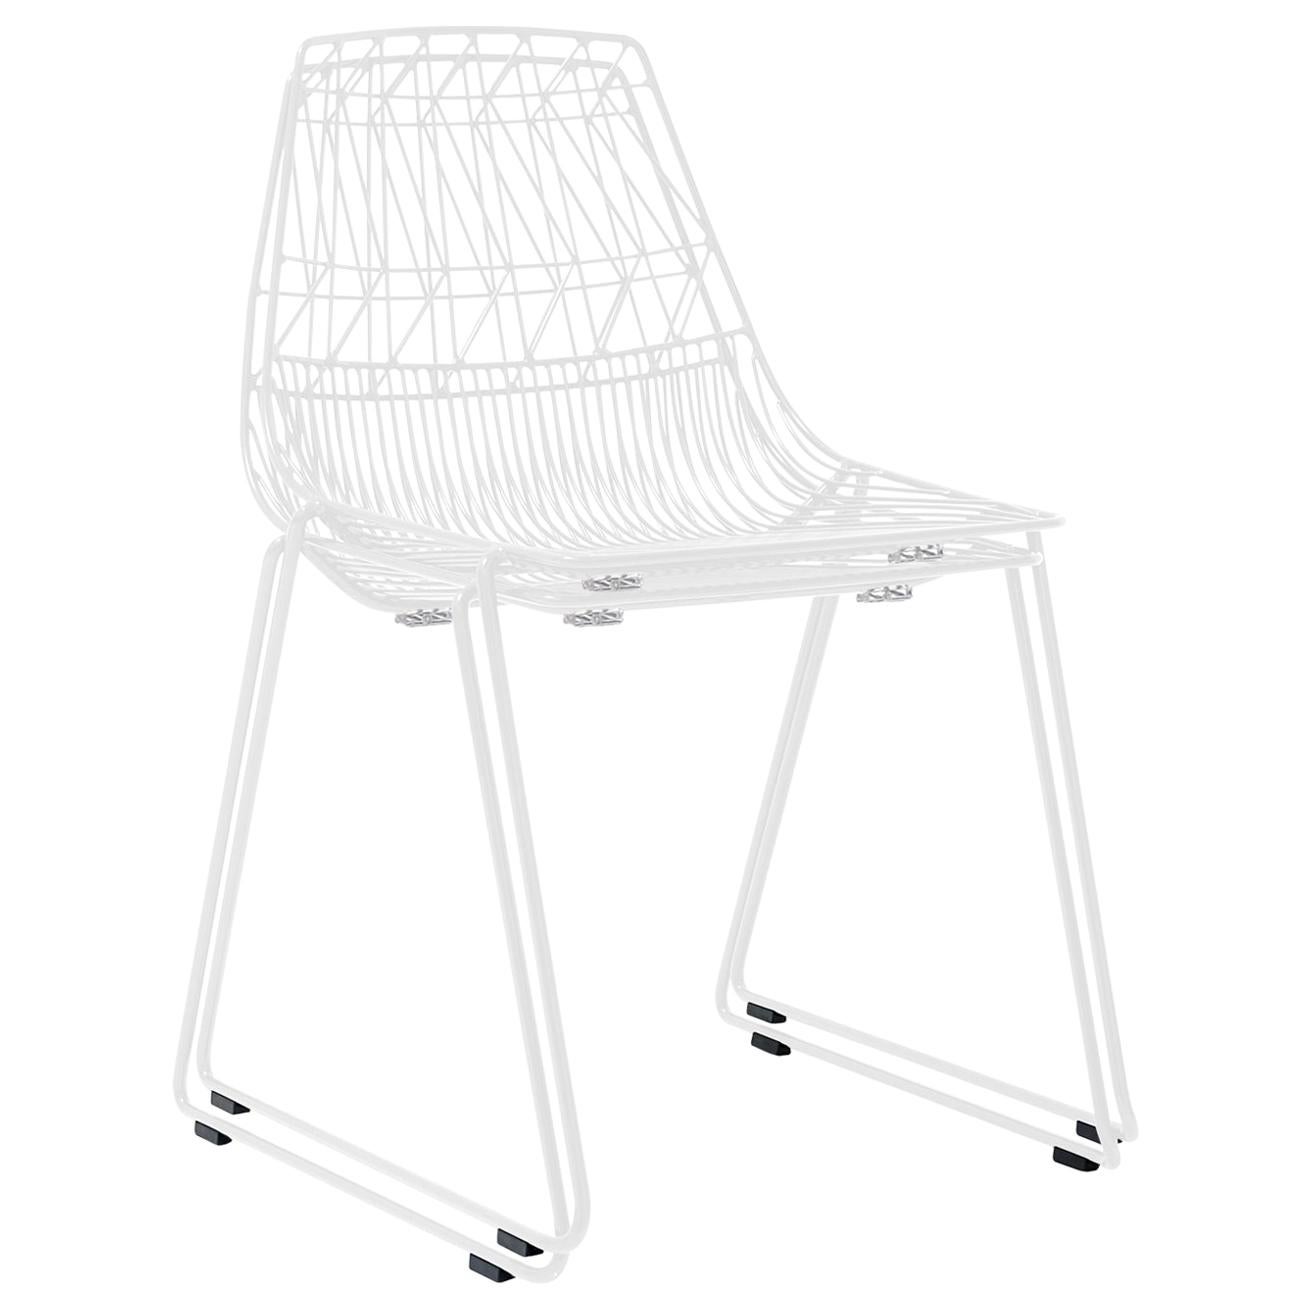 Mid-Century Modern, Minimalist Wire Chair, Stacking Side Chair in White